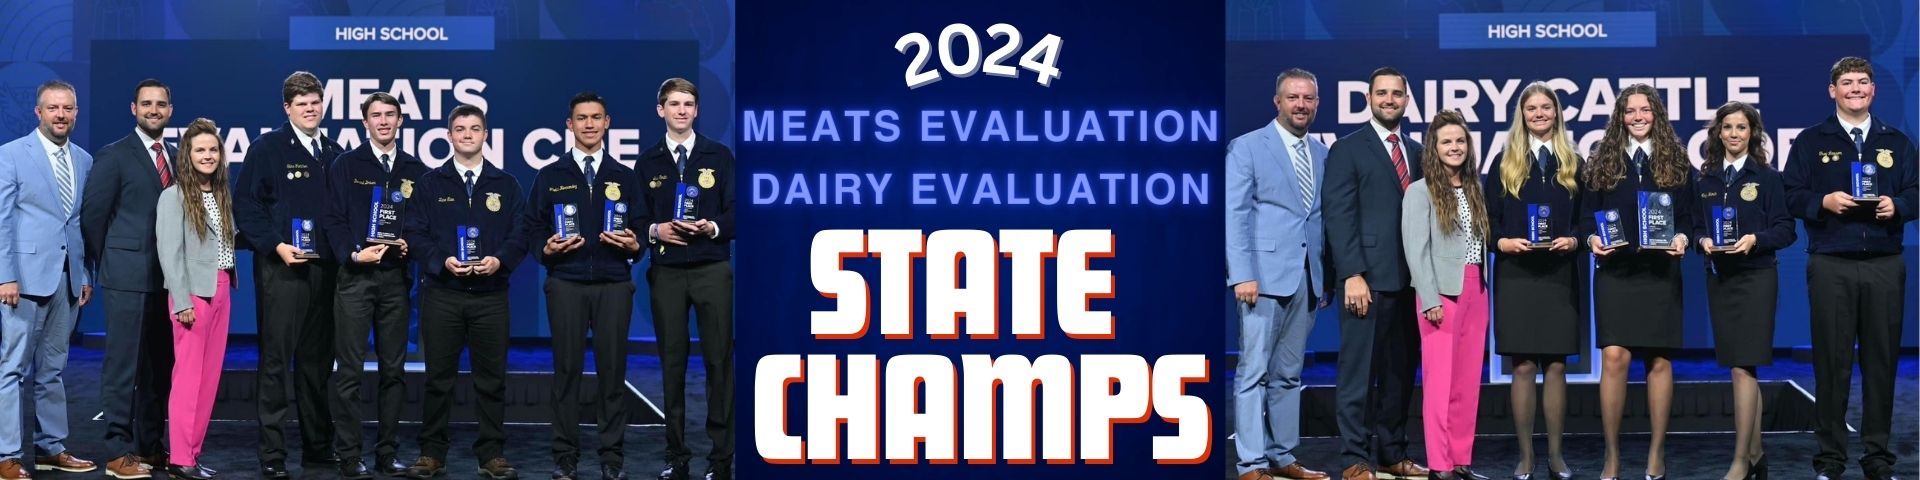 2024 Dairy & Meats Evaluation State Champs